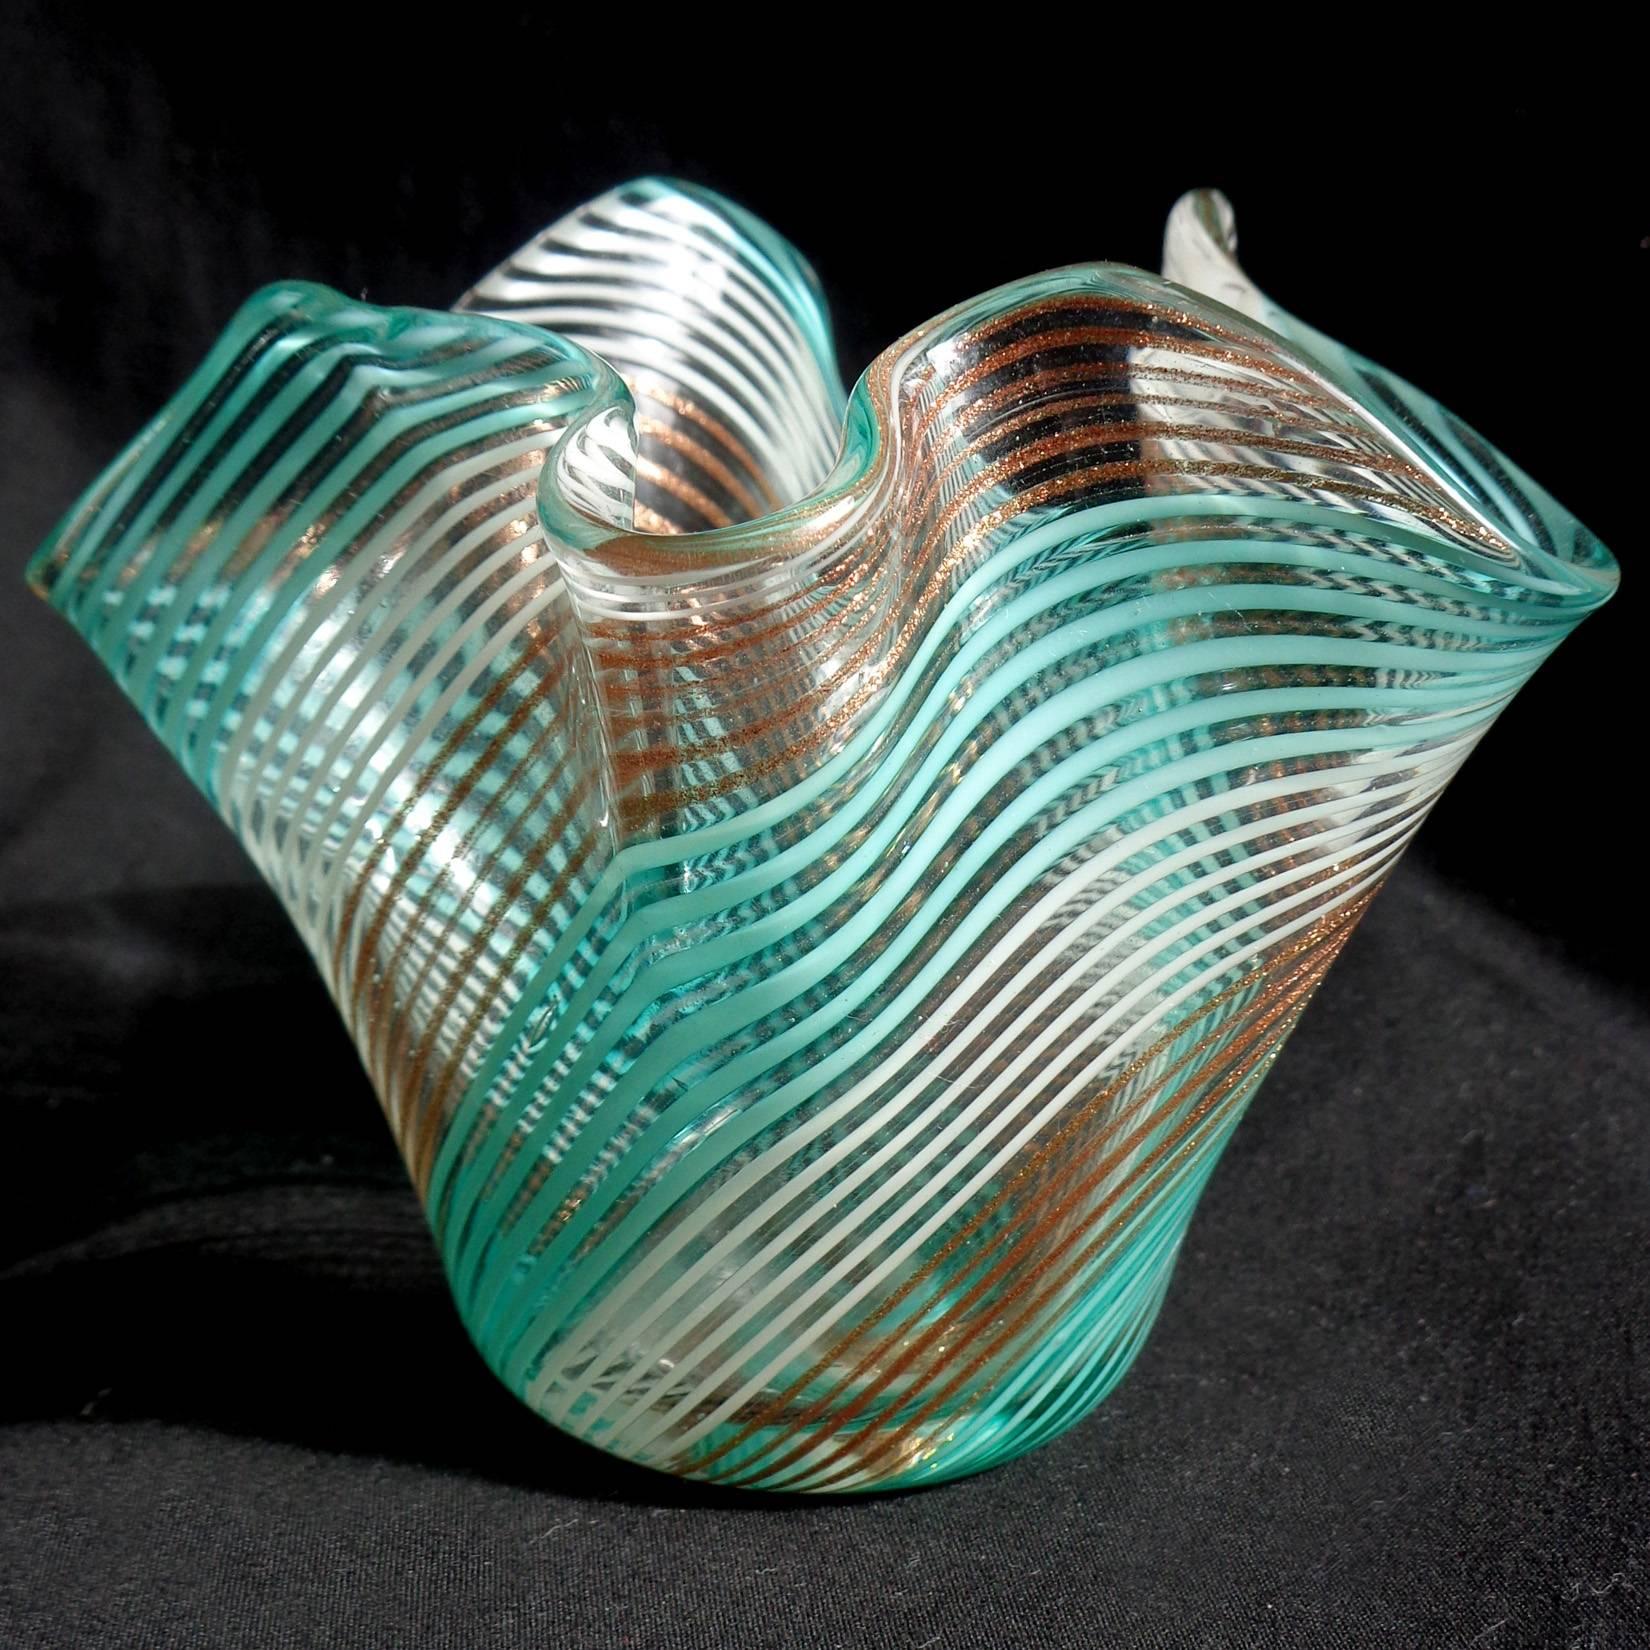 Free shipping worldwide! See details below description.

Beautiful set of three Murano handblown filigrana ribbons art glass small vases. Documented to designer Dino Martens for Aureliano Toso. Measurements vary, largest is 4 1/4